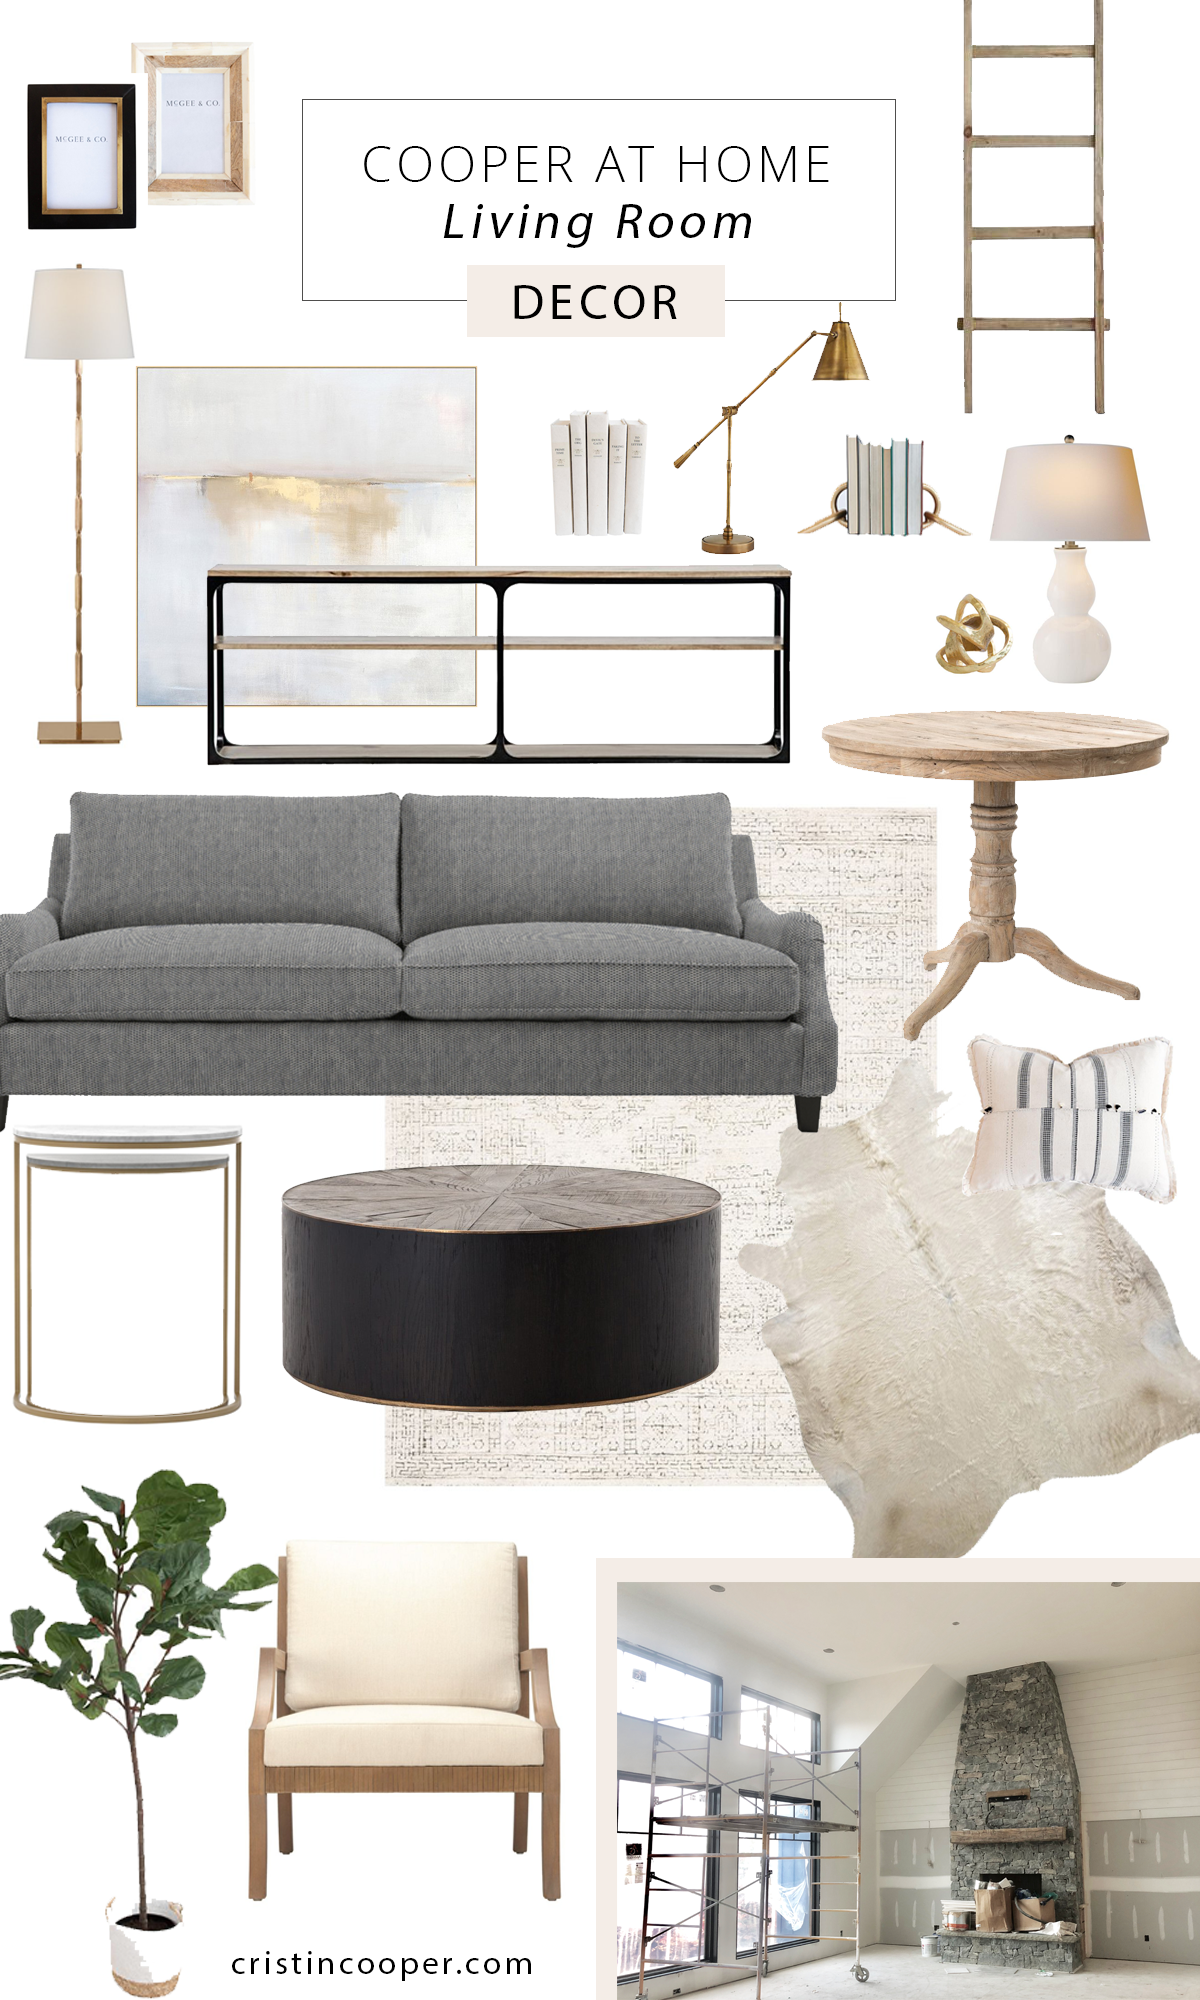 McGee & Co. Living Room Inspiration